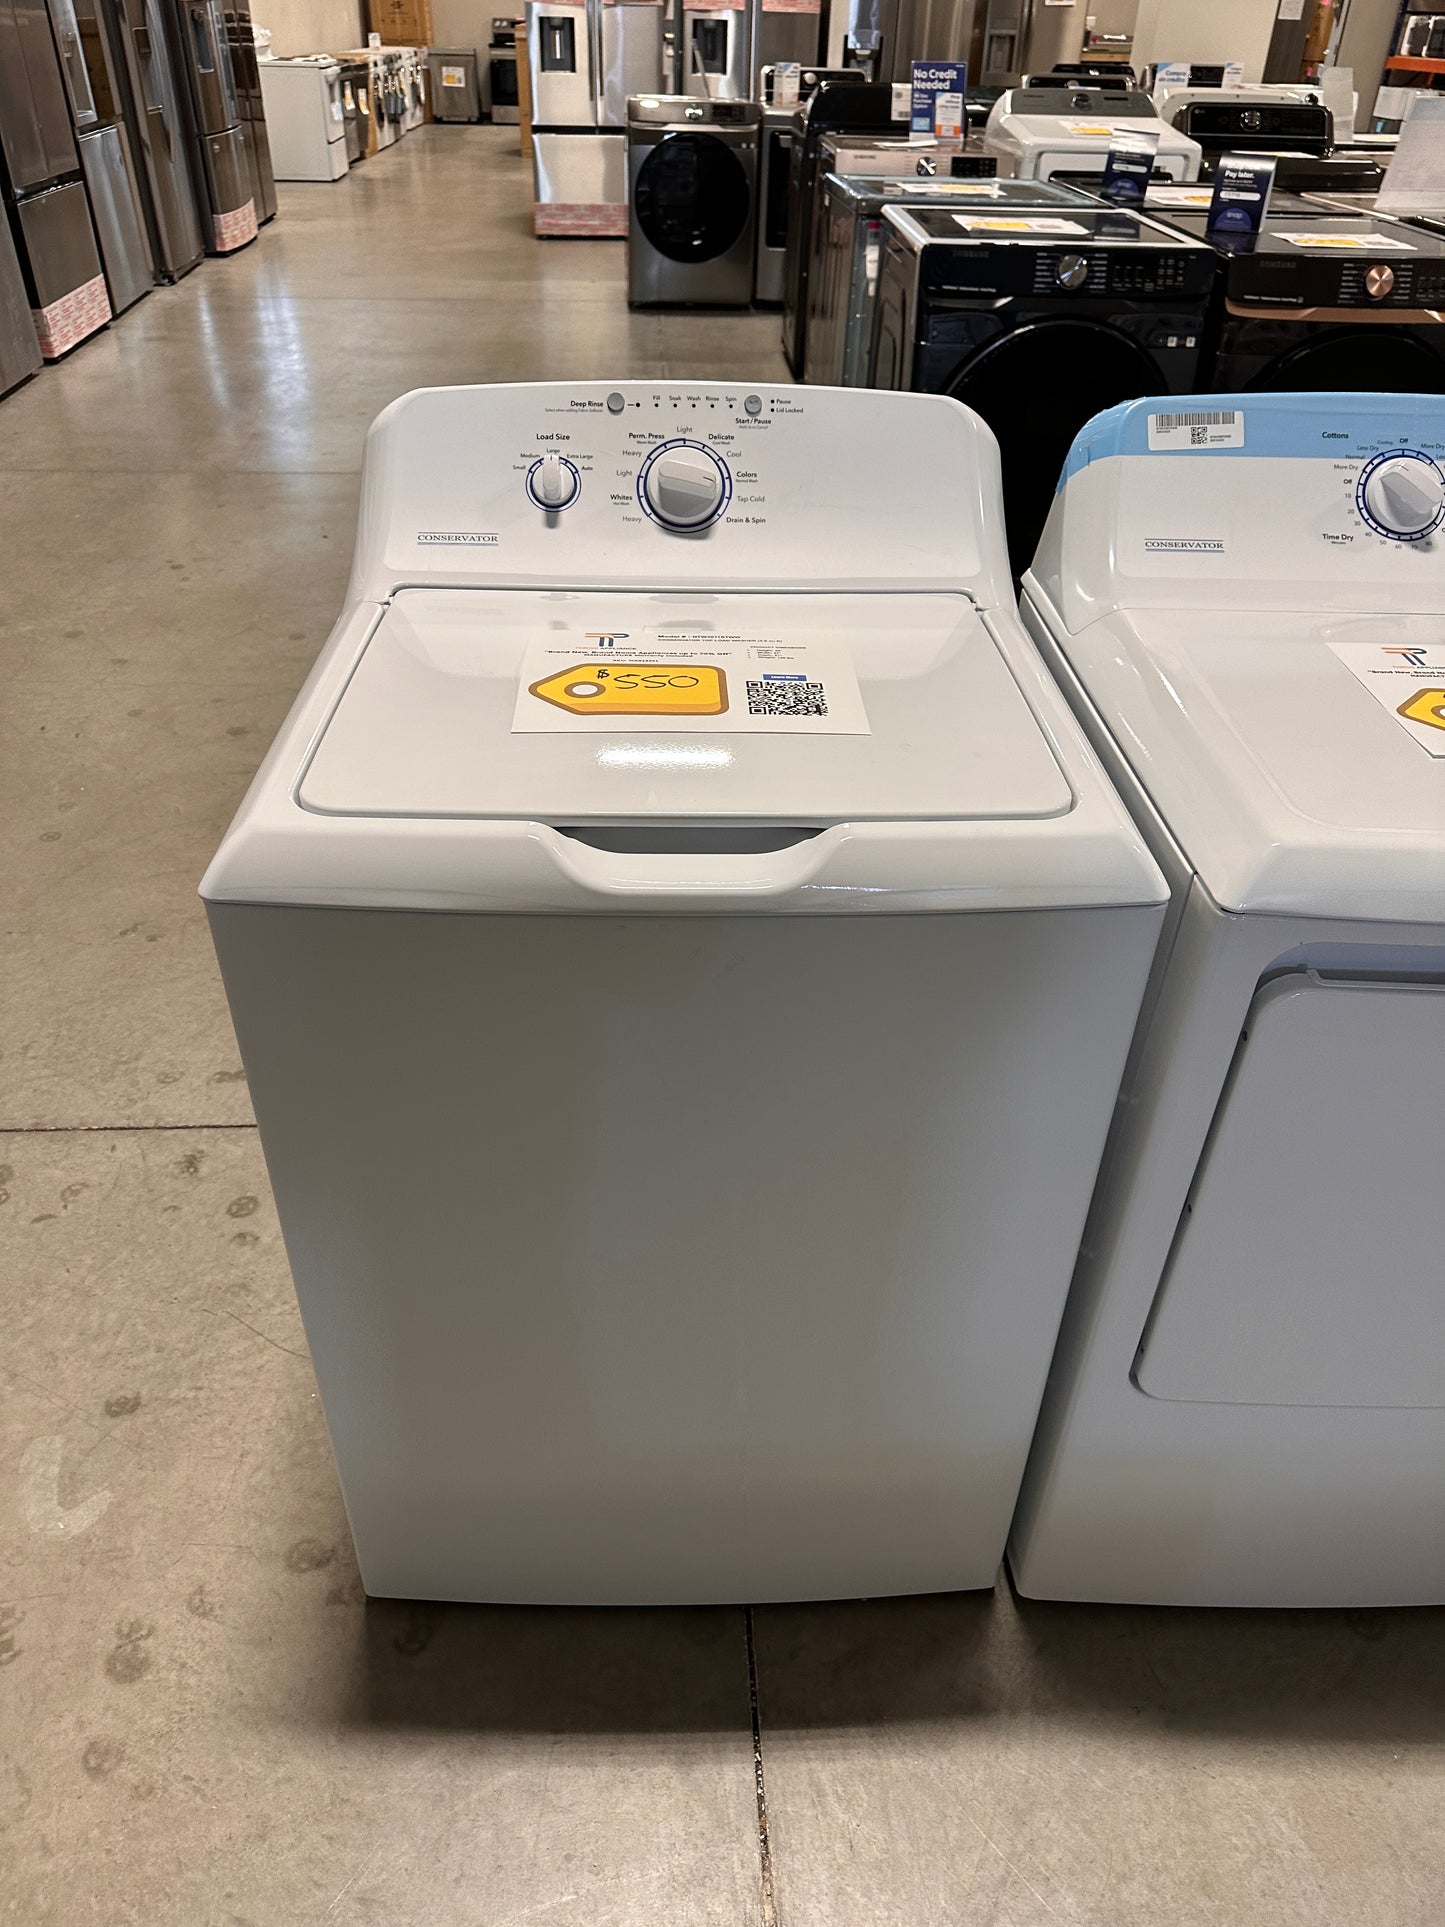 GORGEOUS BRAND NEW TOP LOAD WASHER with DEEP WATER OPTION MODEL:NTW3811STWW  WAS13251